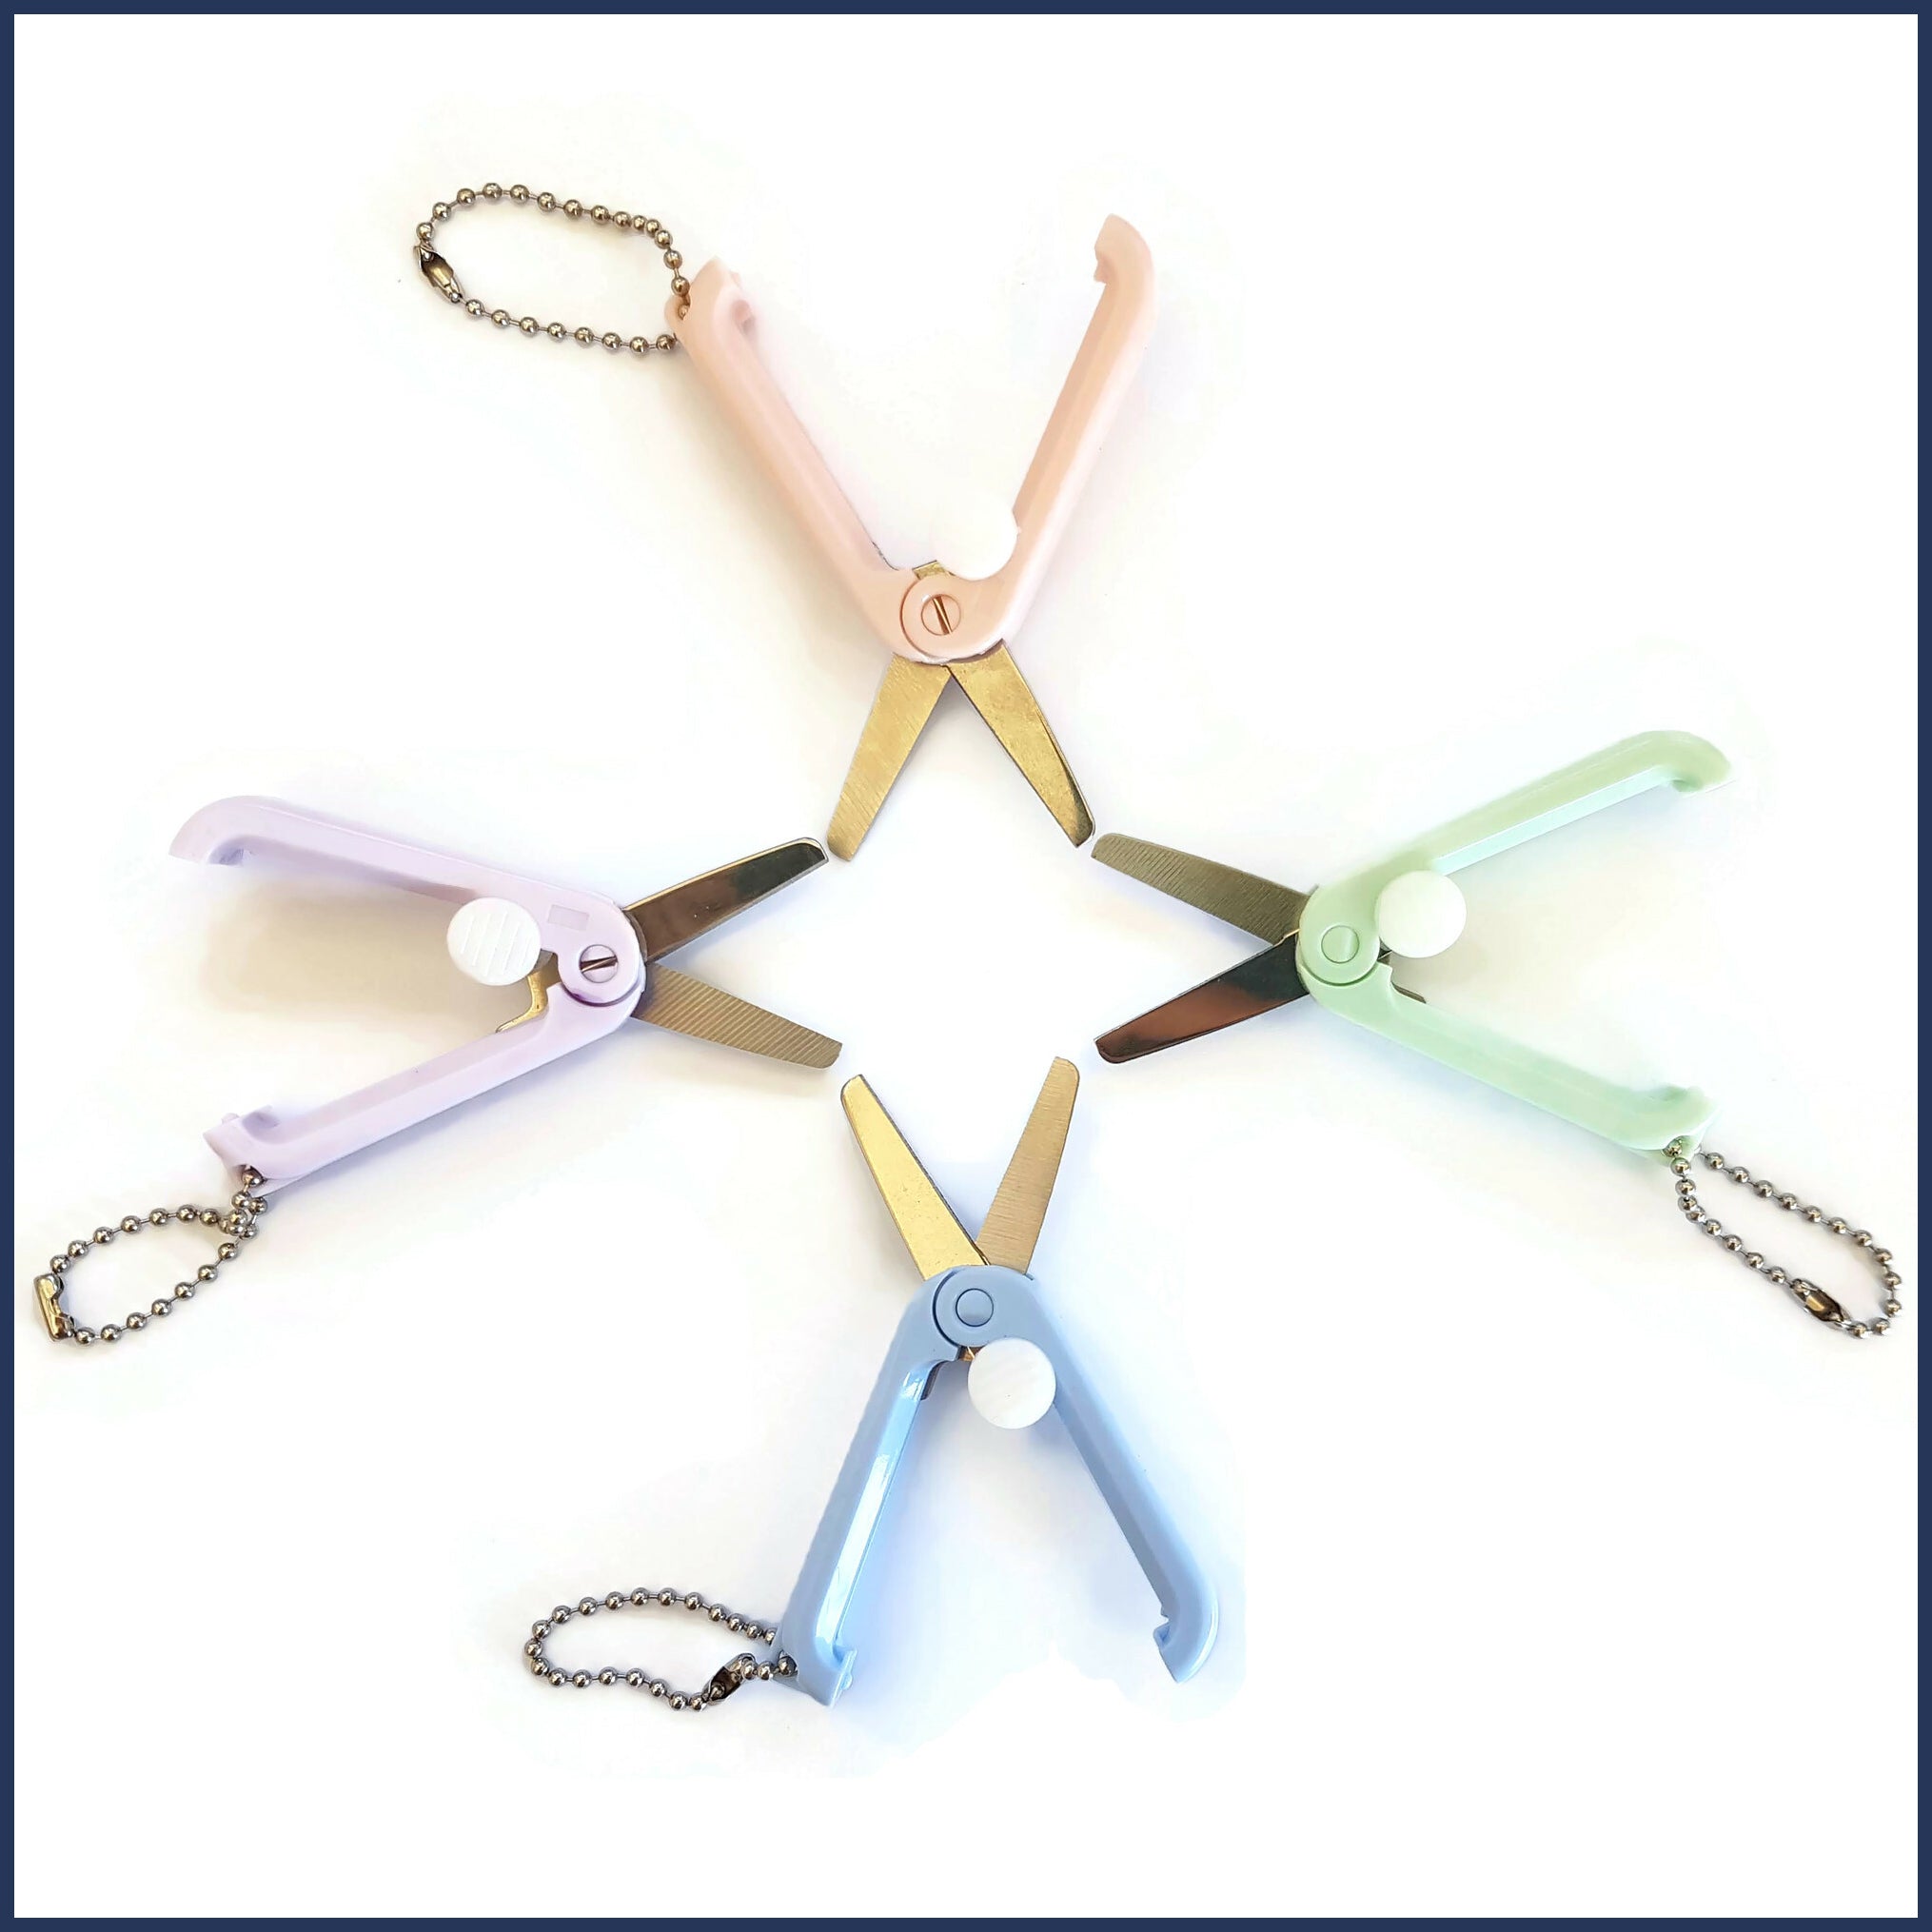 Tiny Snips Embroidery Scissors – Snuggly Monkey